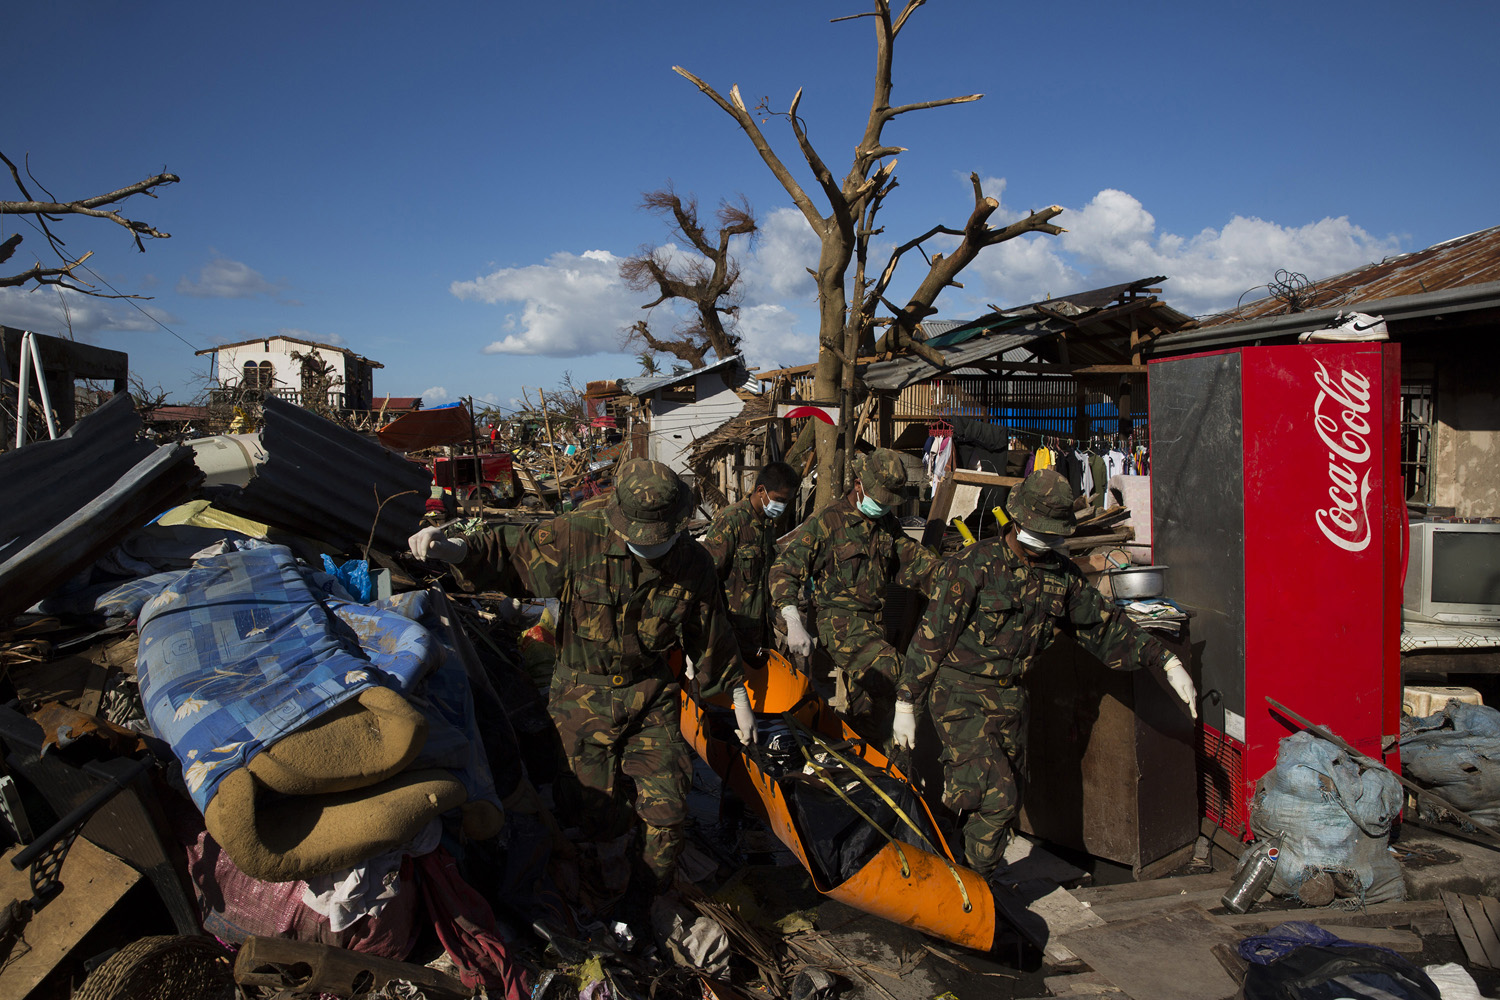 Soldiers joined search and rescue teams collecting bodies of victims in Tanuan, The Philippines on Nov. 15, 2013.